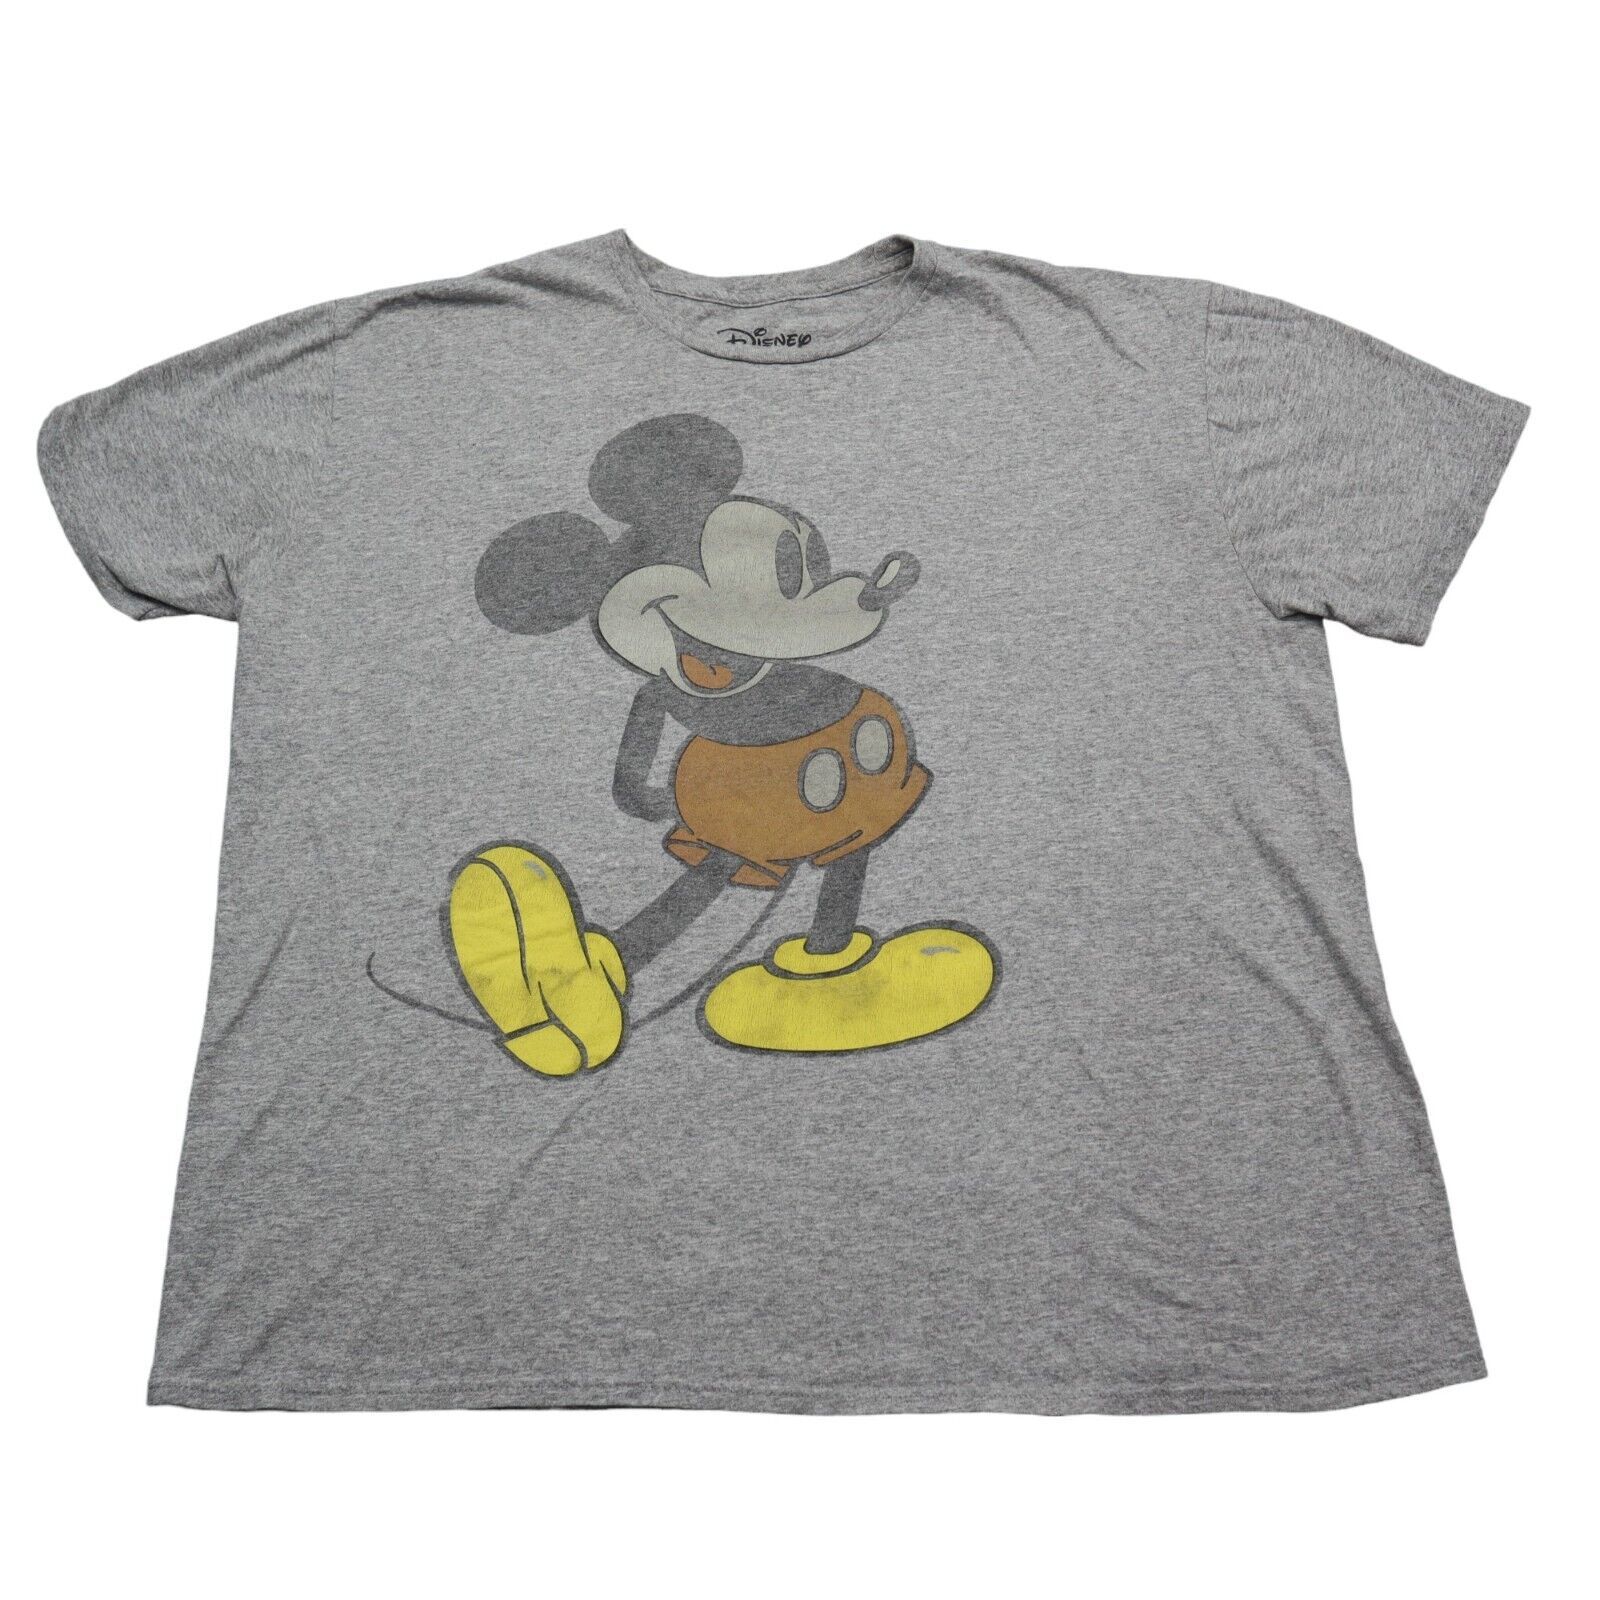 Primary image for Disney Shirt Mens XL Gray Short Sleeve Crew Neck Graphic Print Knit Casual Tee